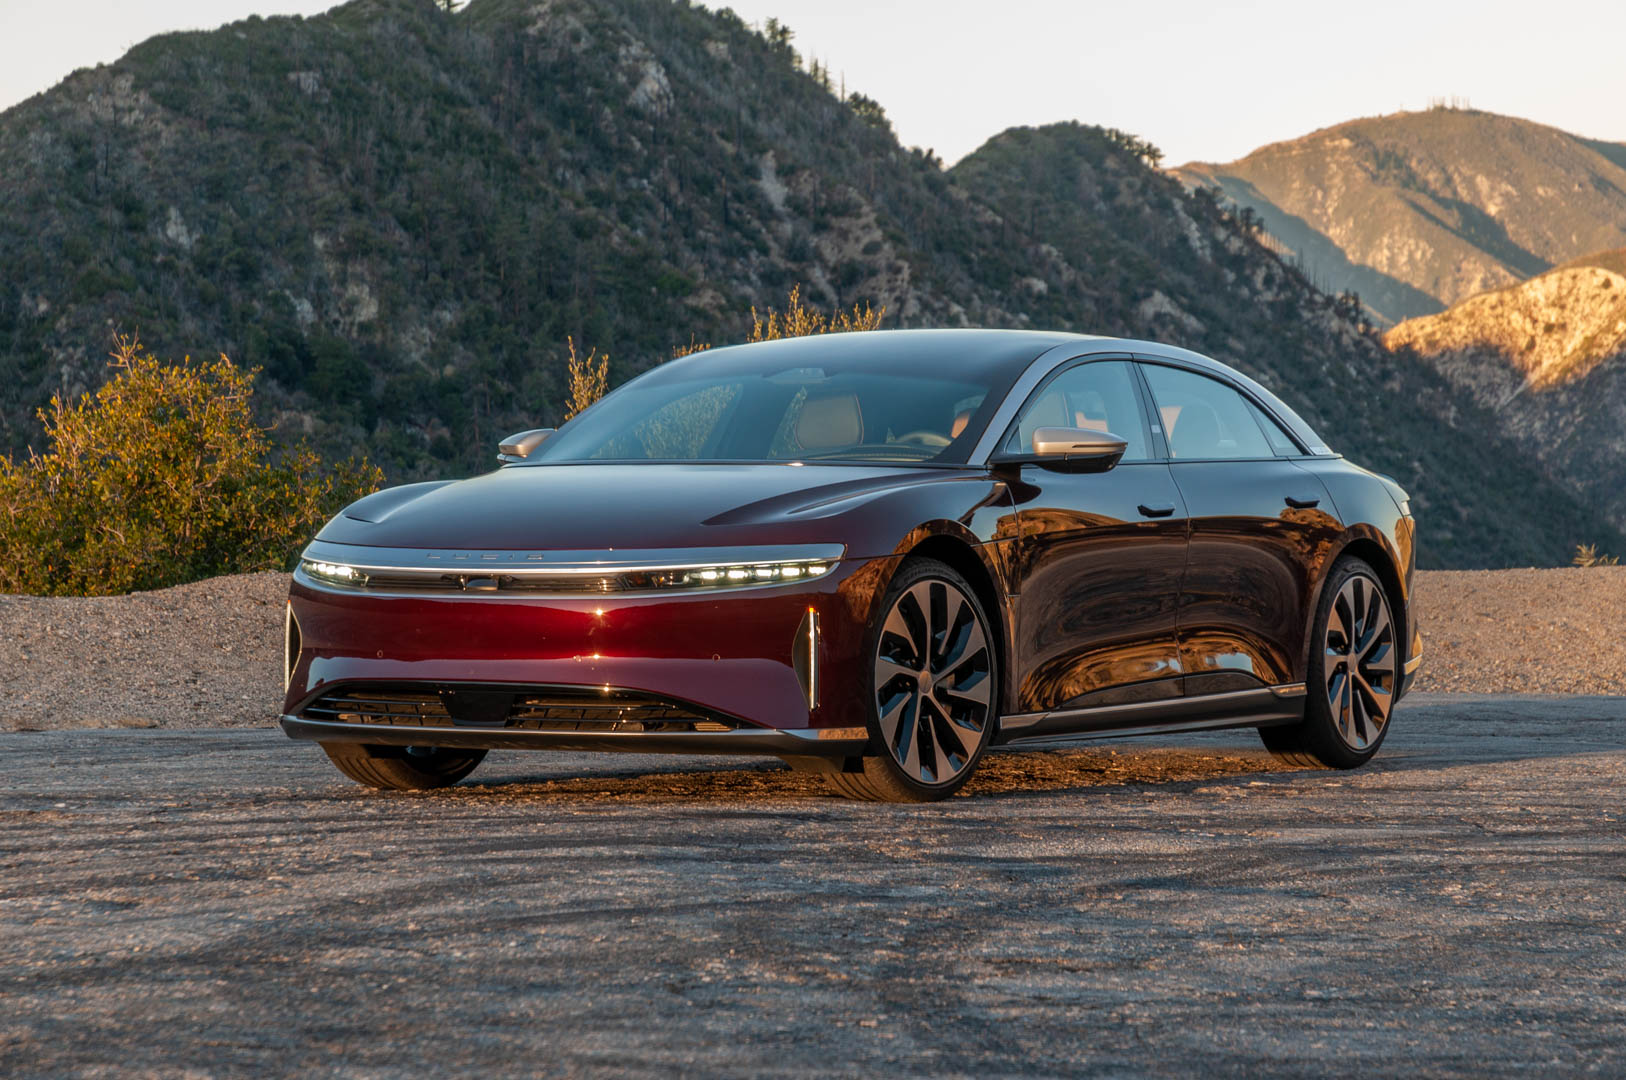 Review: 2022 Lucid Air Grand Touring keeps getting better